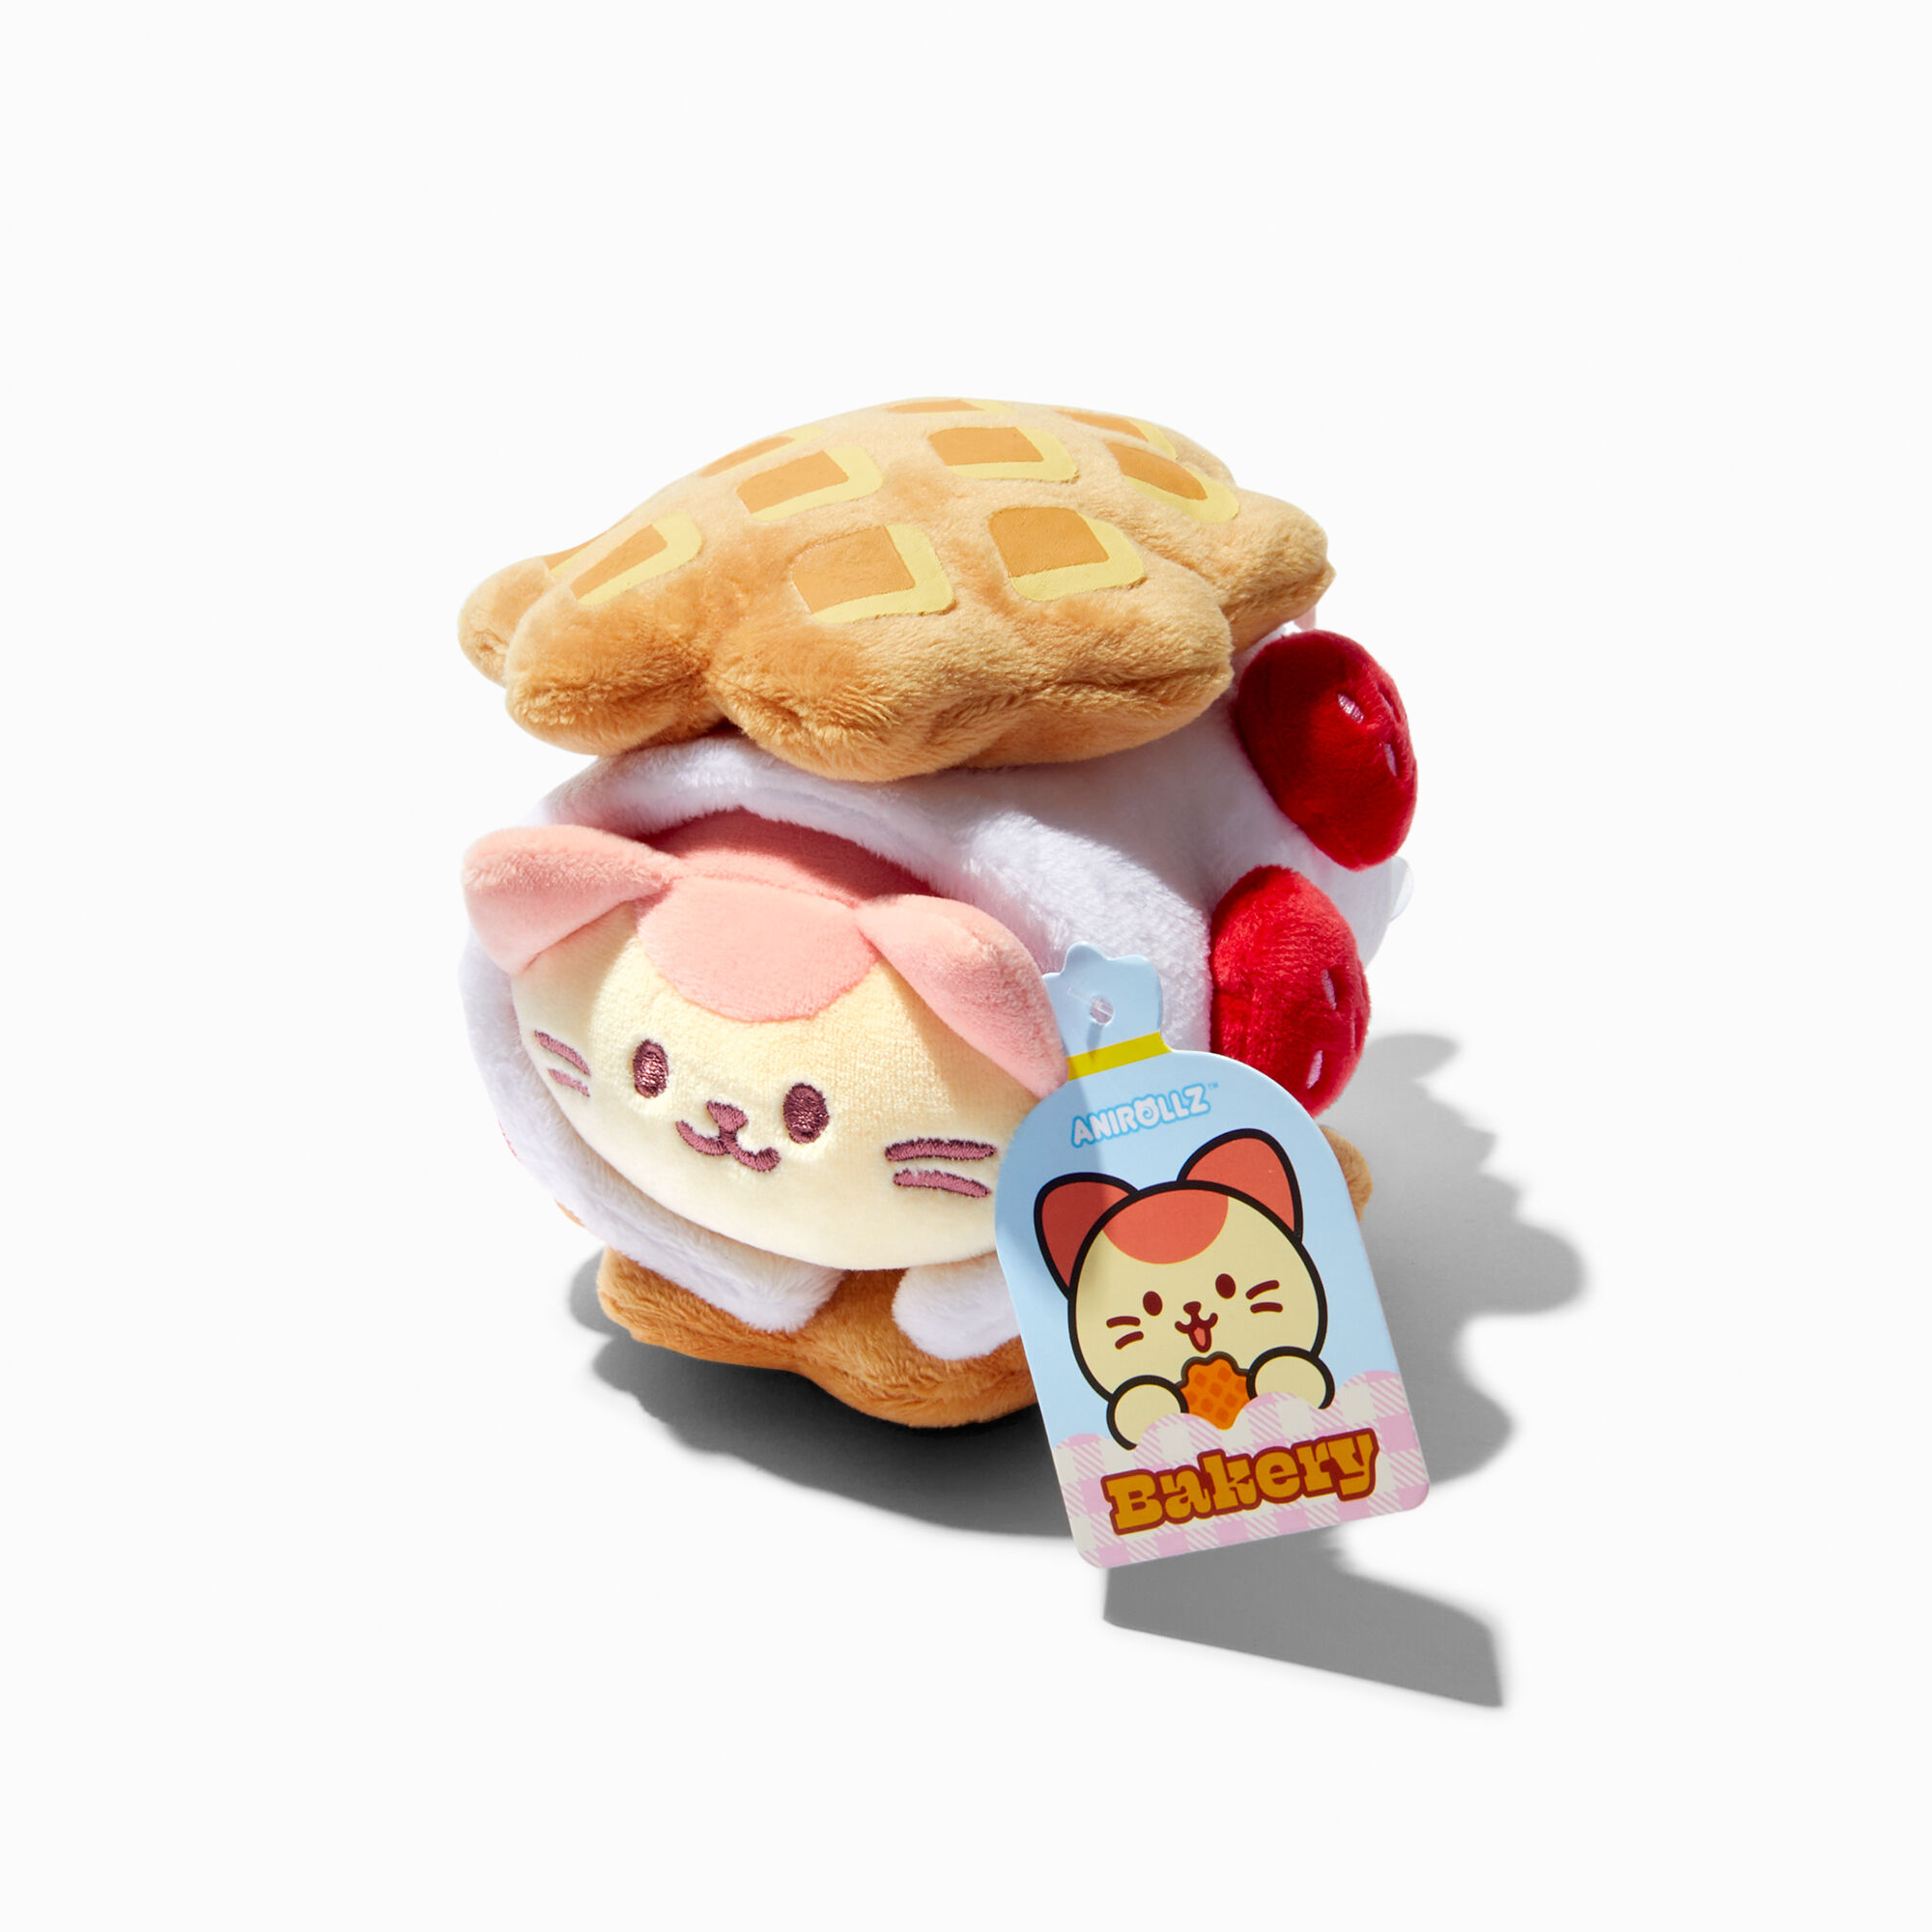 View Anirollz Bakery Claires Exclusive Kittiroll Waffle Soft Toy information